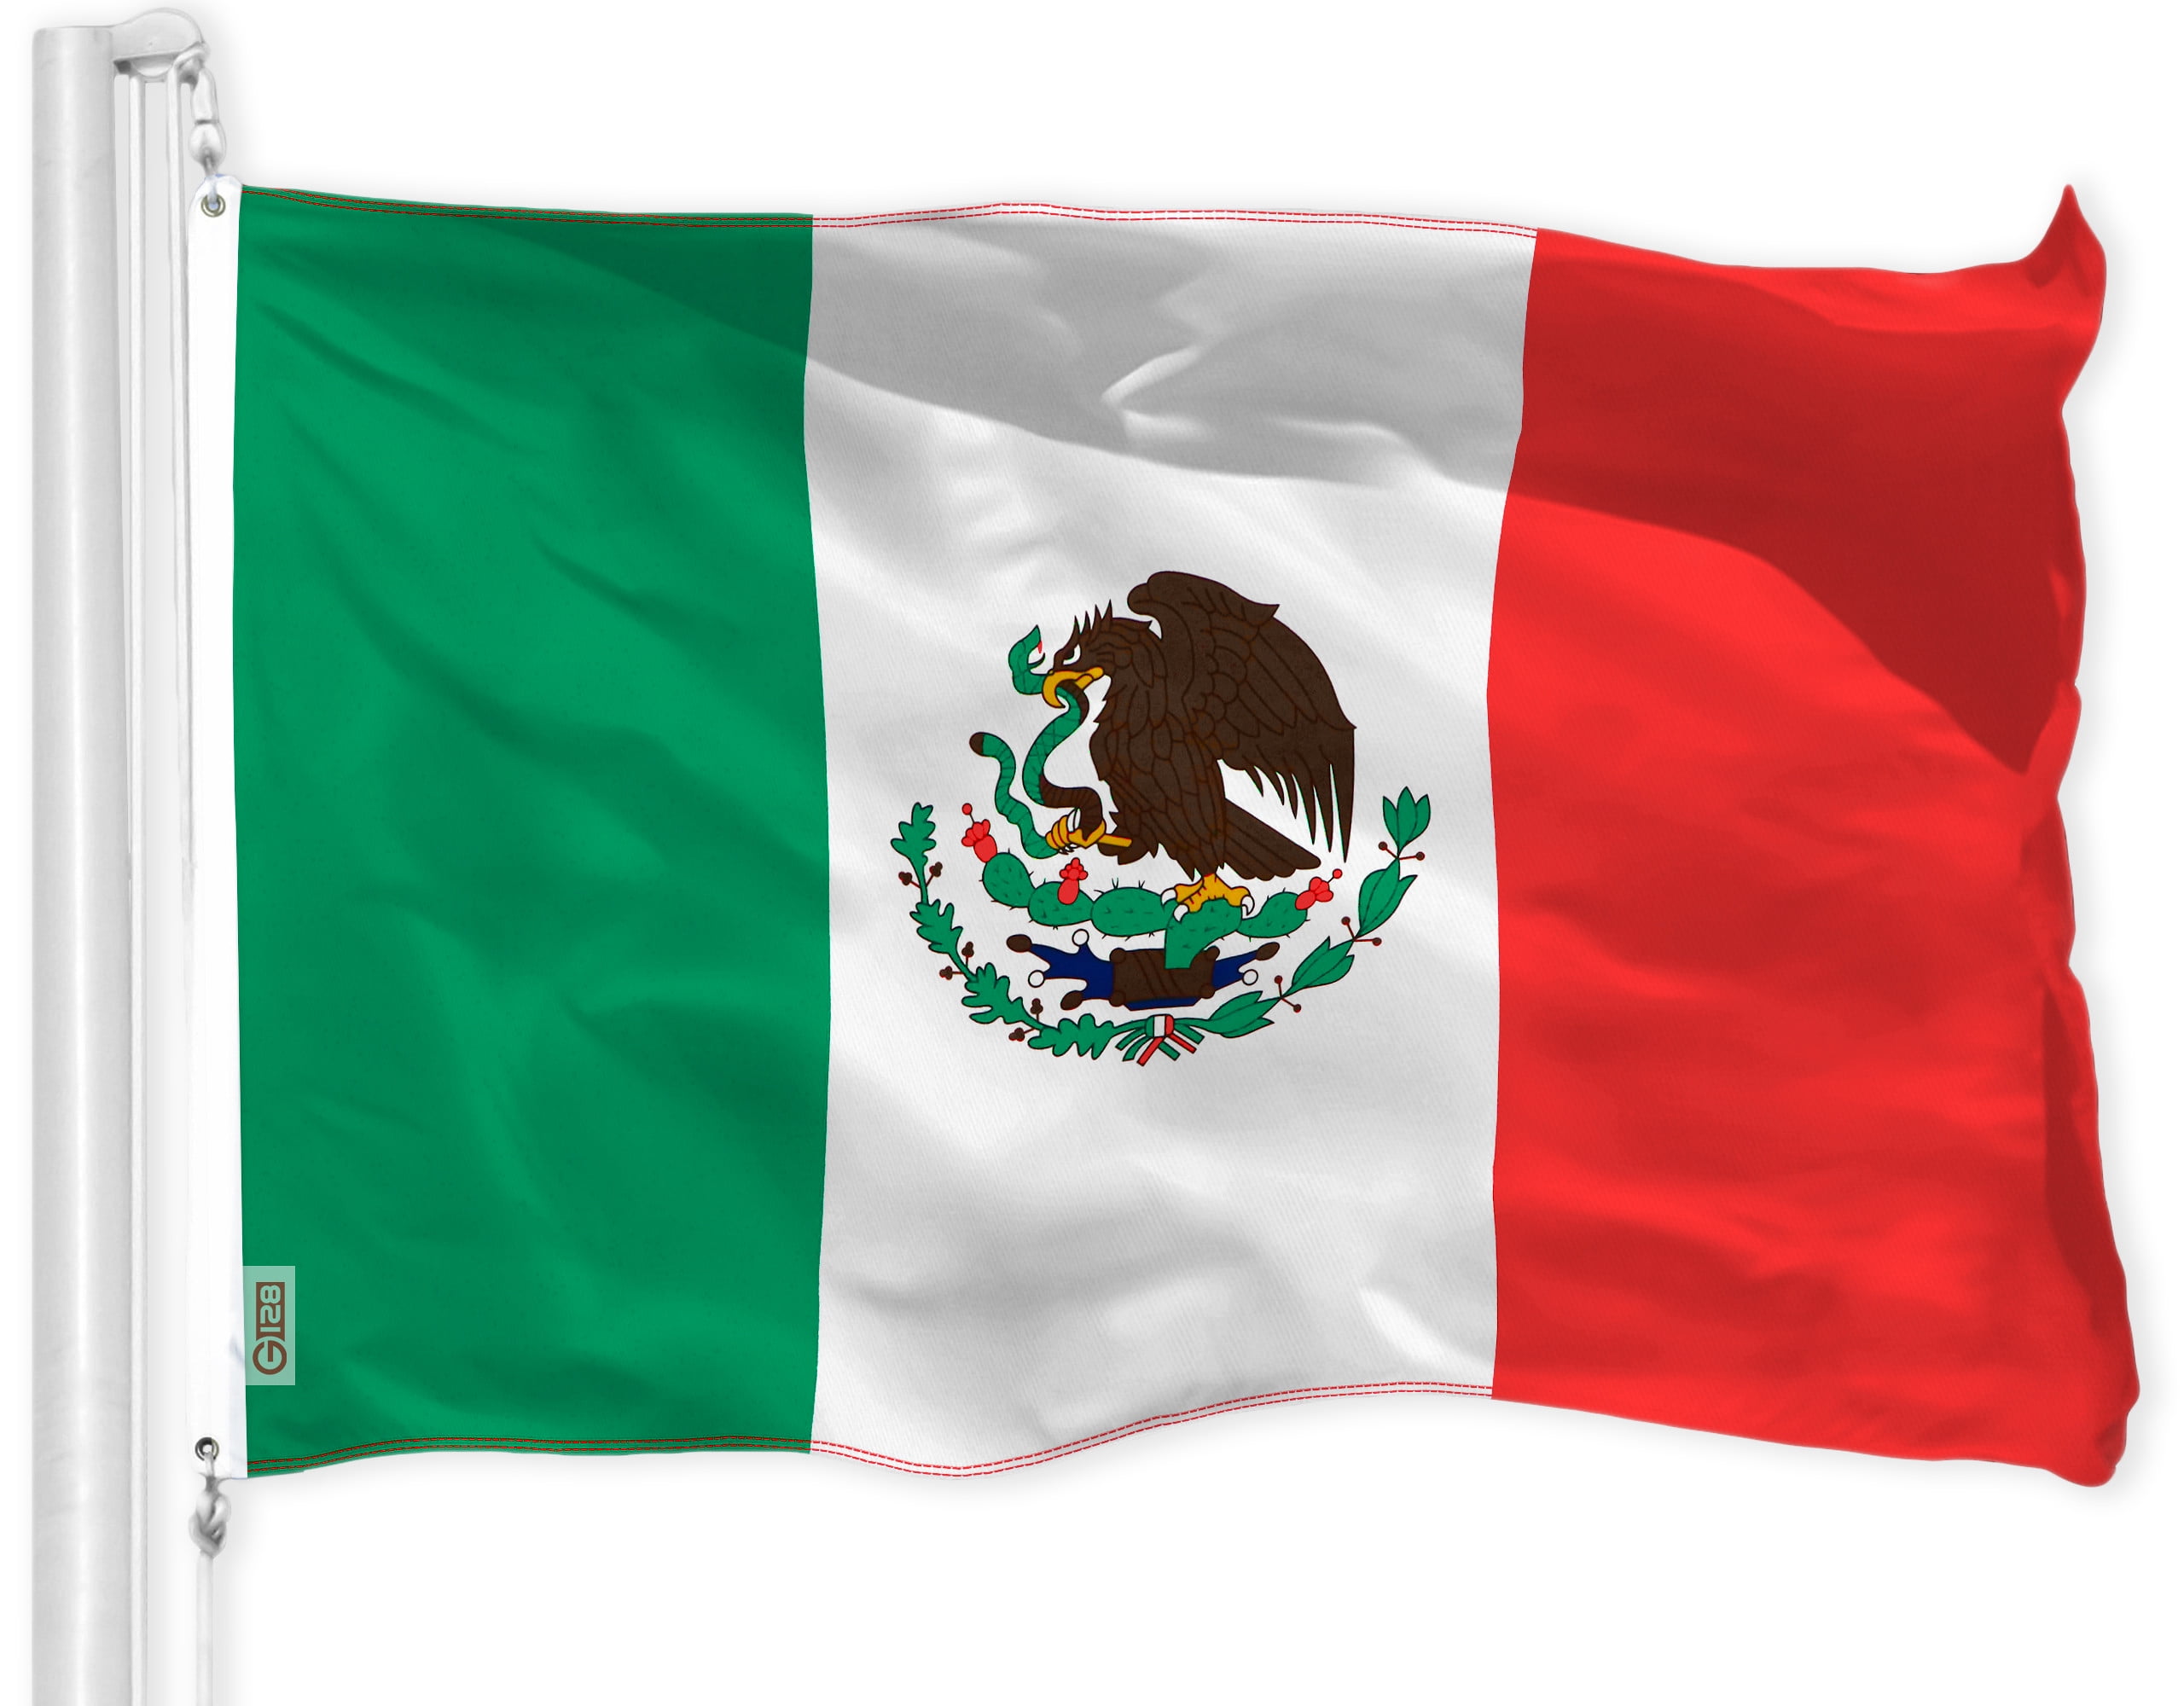 Mexico flag 3ft x 5ft Super Knit Polyester